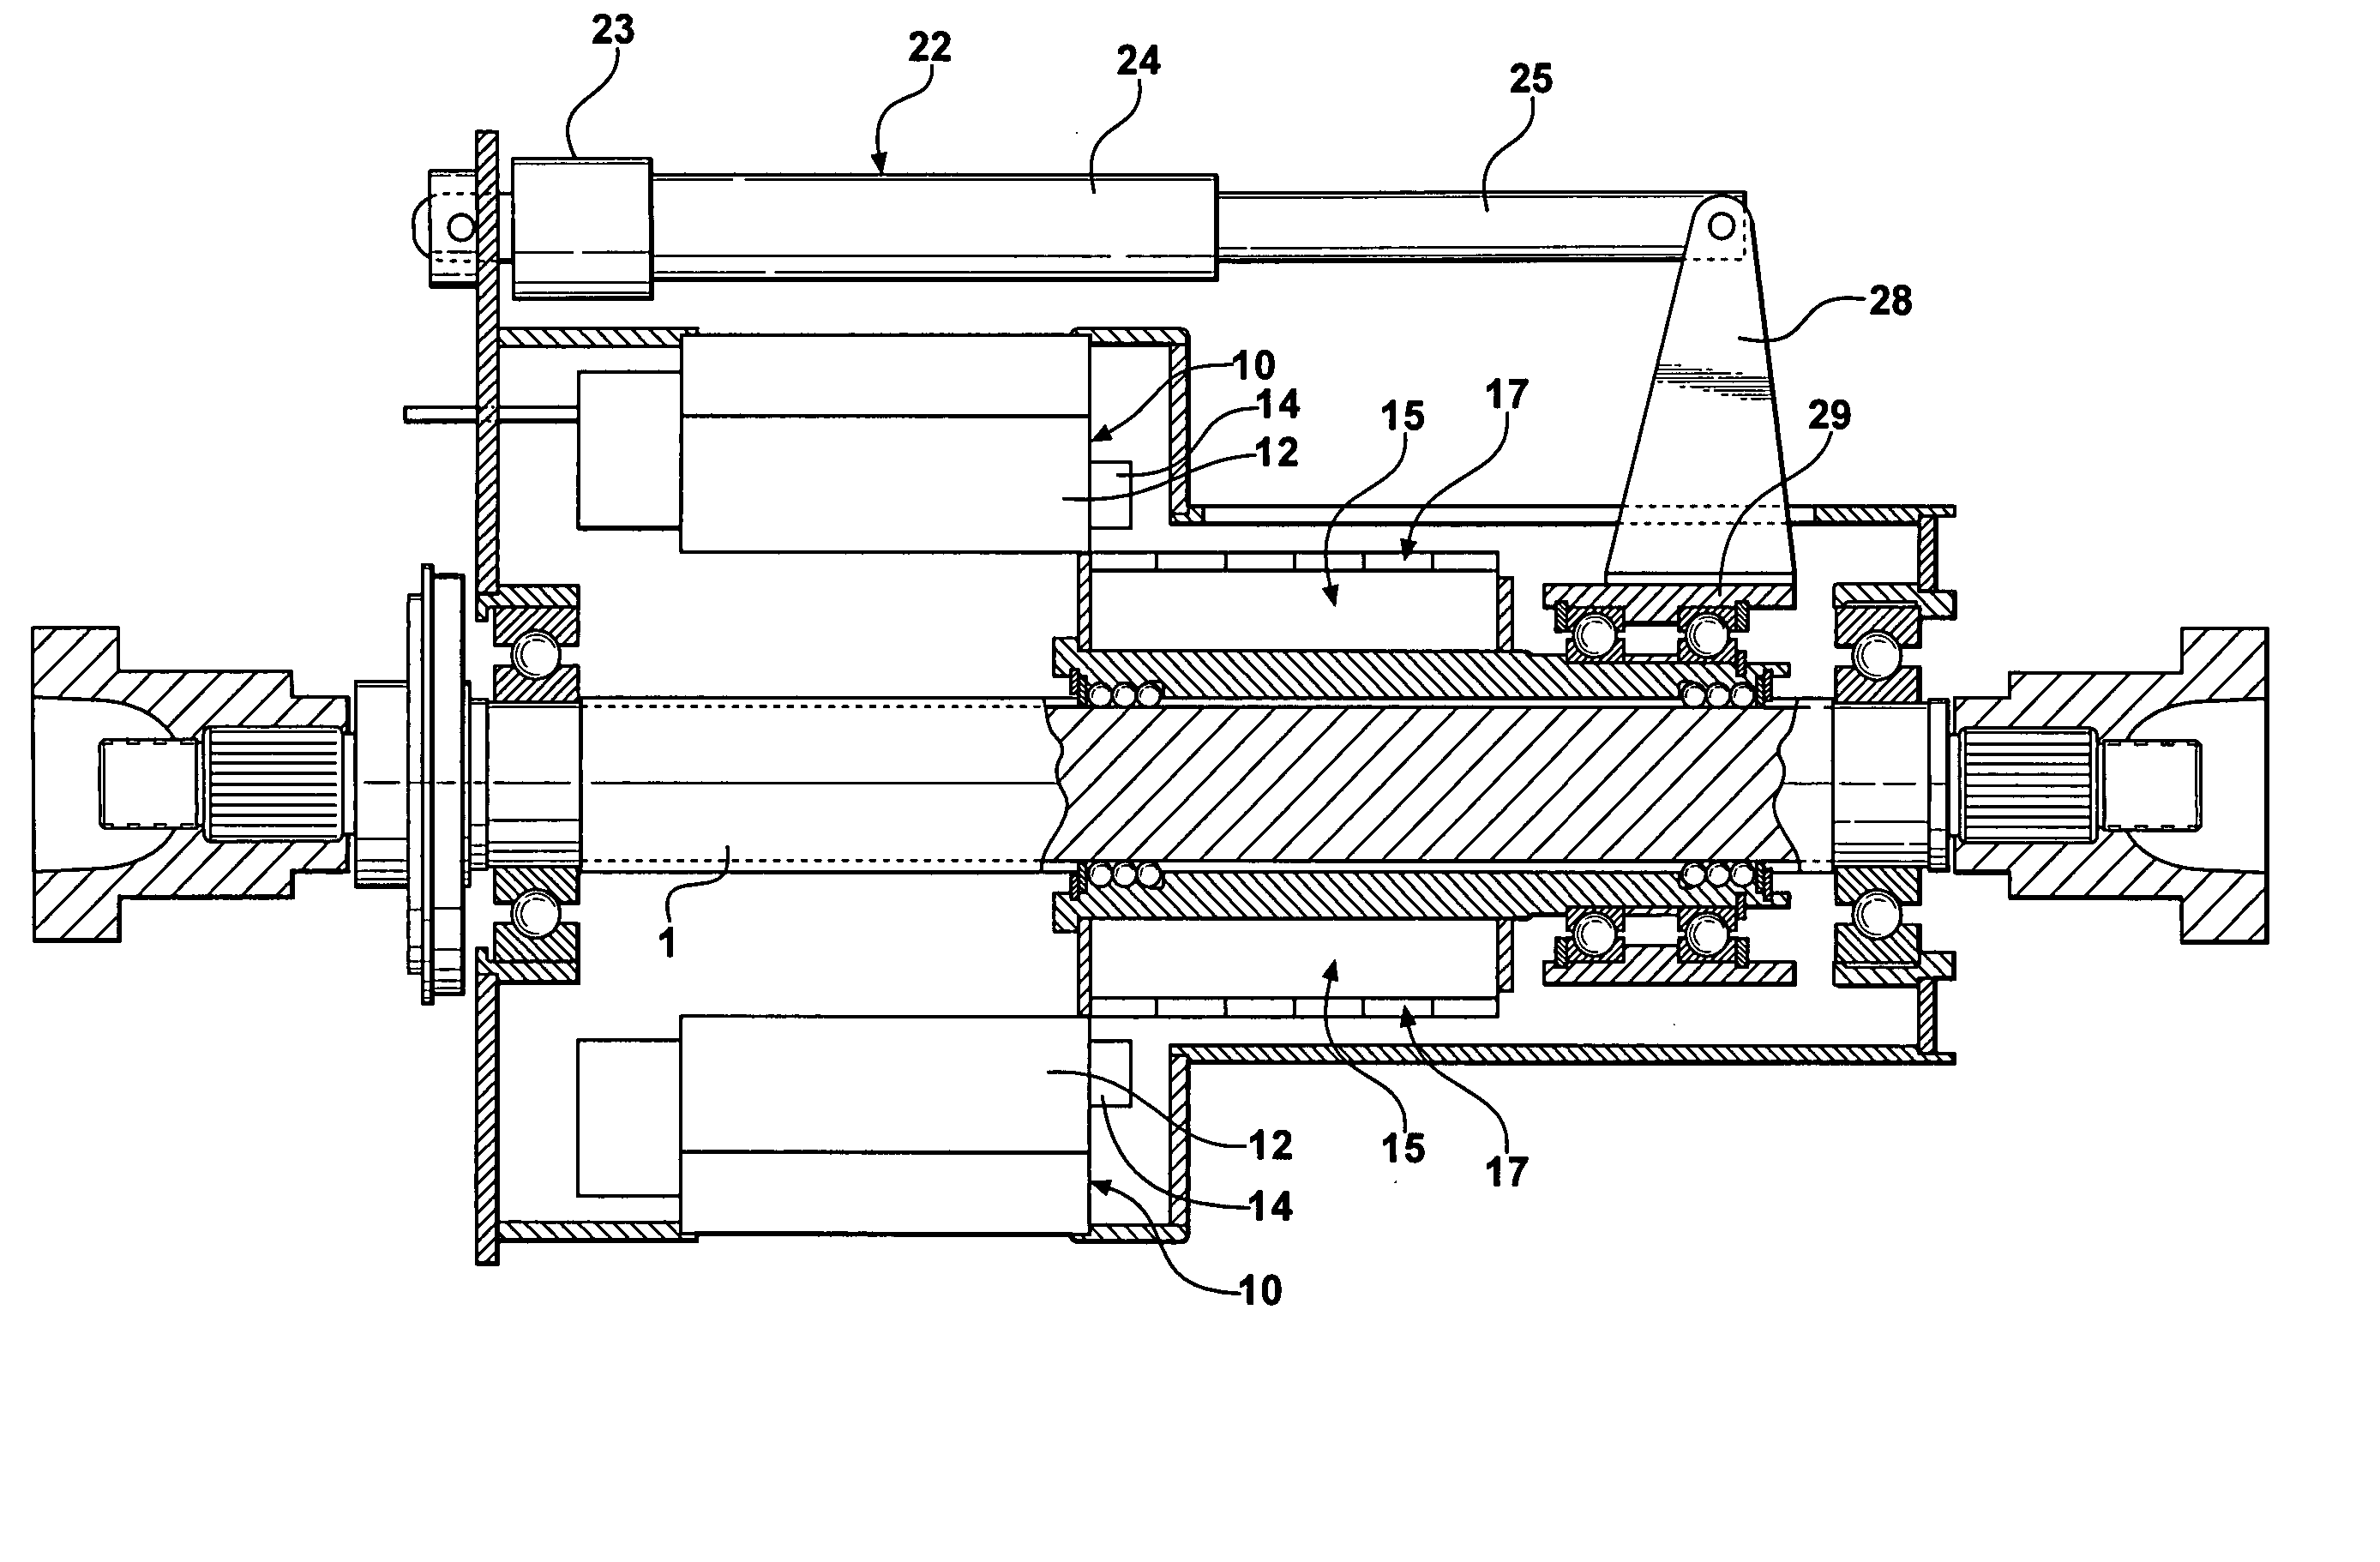 Brushless permanent magnet motor/generator with axial rotor decoupling to eliminate magnet induced torque losses